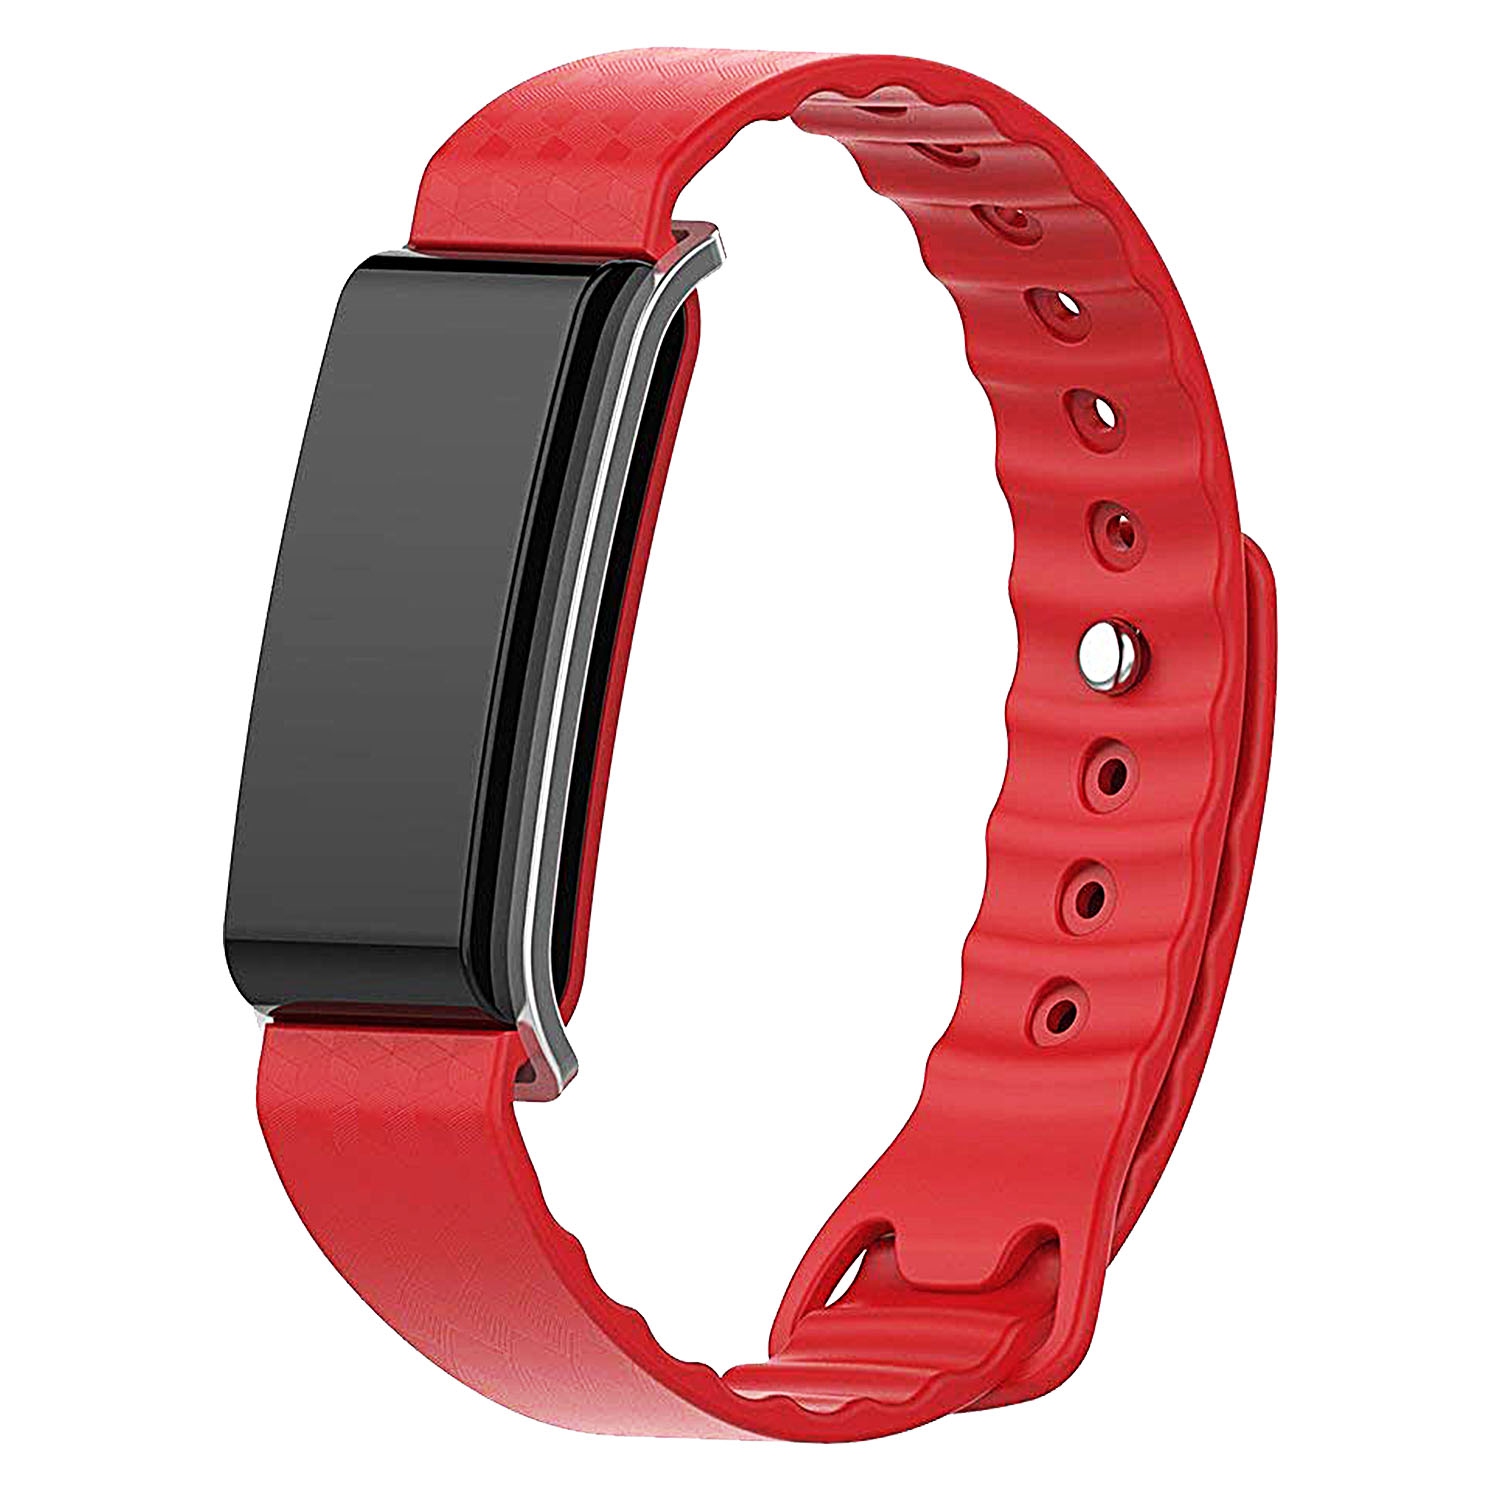 StrapsCo Classic Silicone Rubber Replacement Watch Strap for Huawei Honor/Color Band A2 - Red